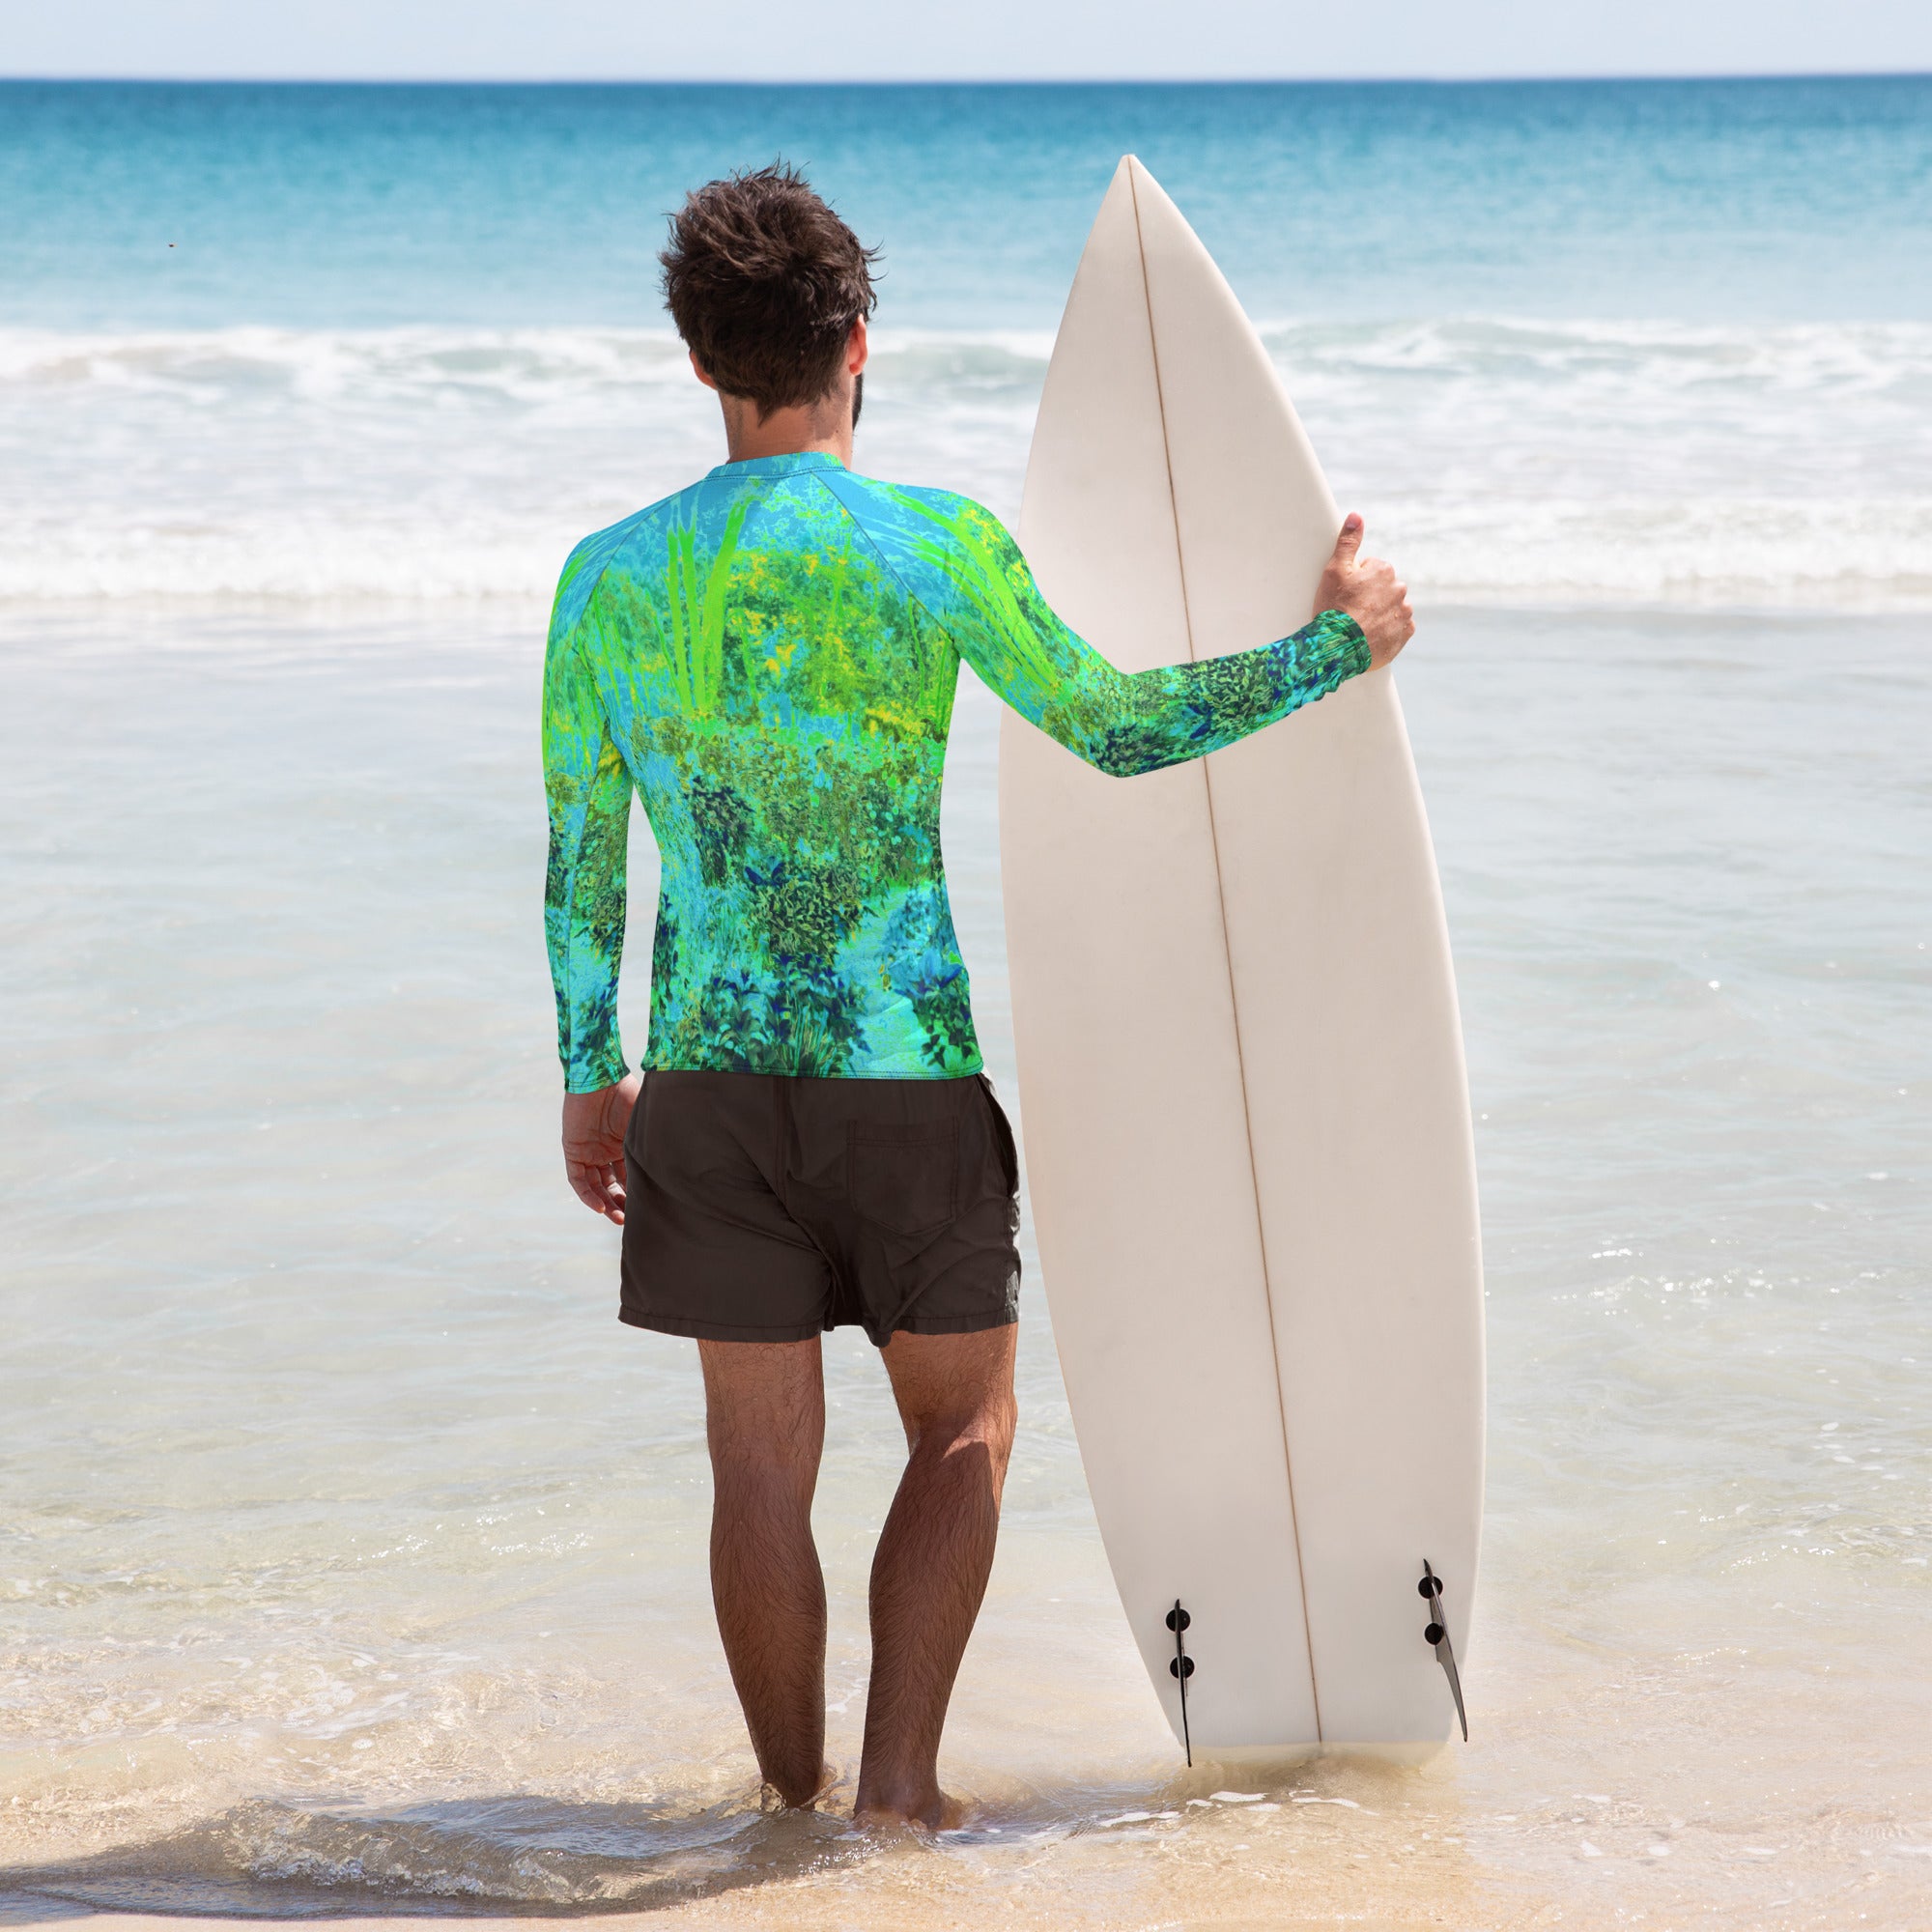 Men's Athletic Rash Guard Shirts - Trippy Lime Green and Blue Impressionistic Landscape